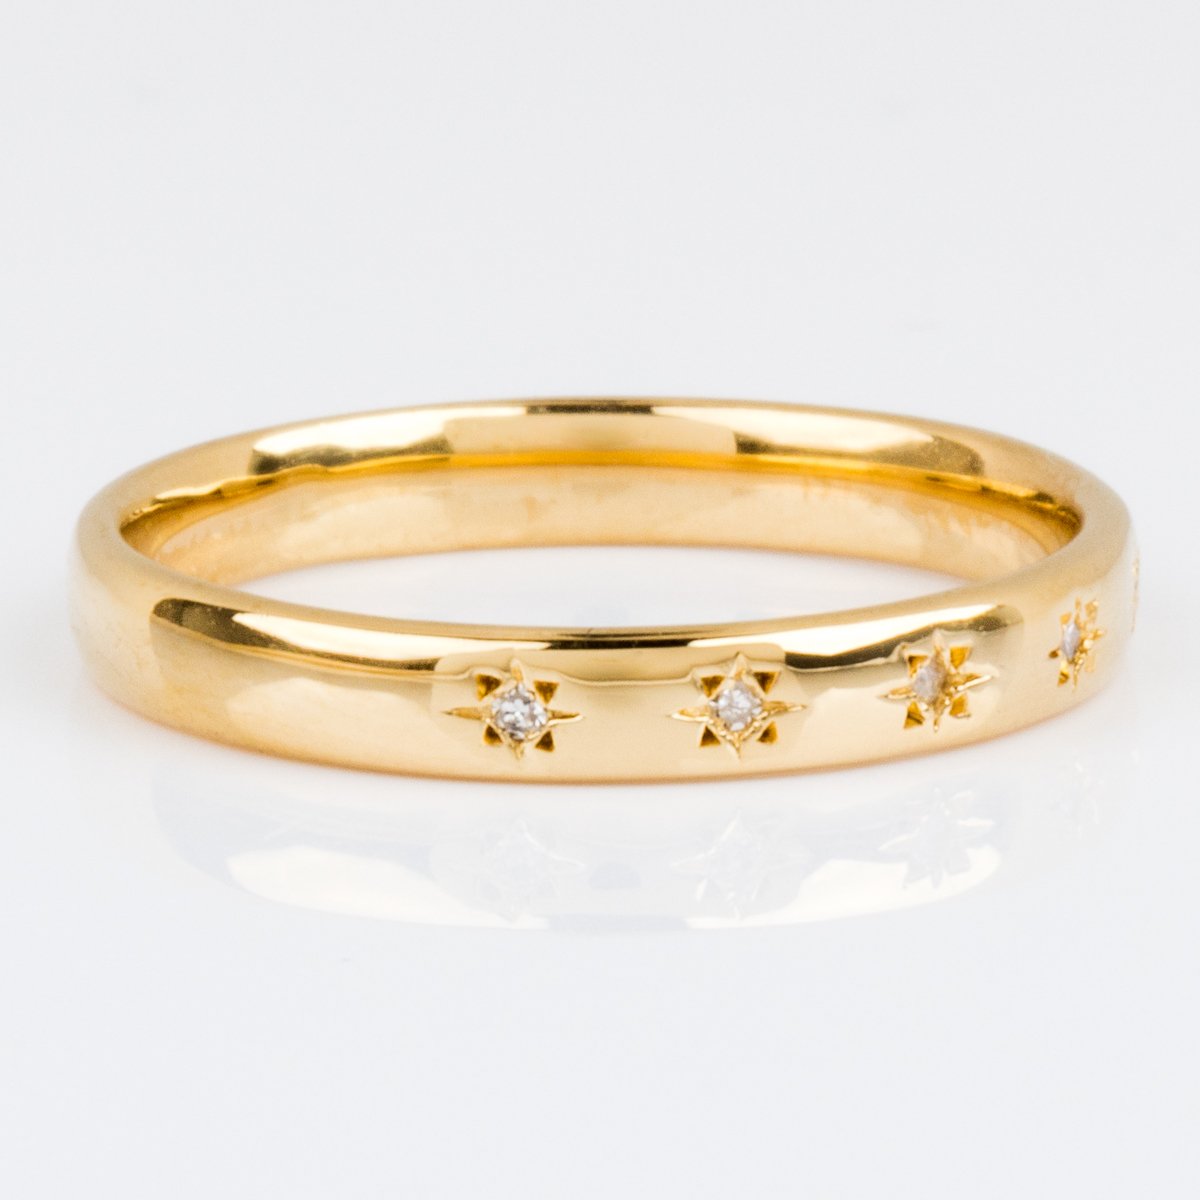 Simple Star Set Diamond Band - rings - Carrie Elizabeth Jewelry local eclectic